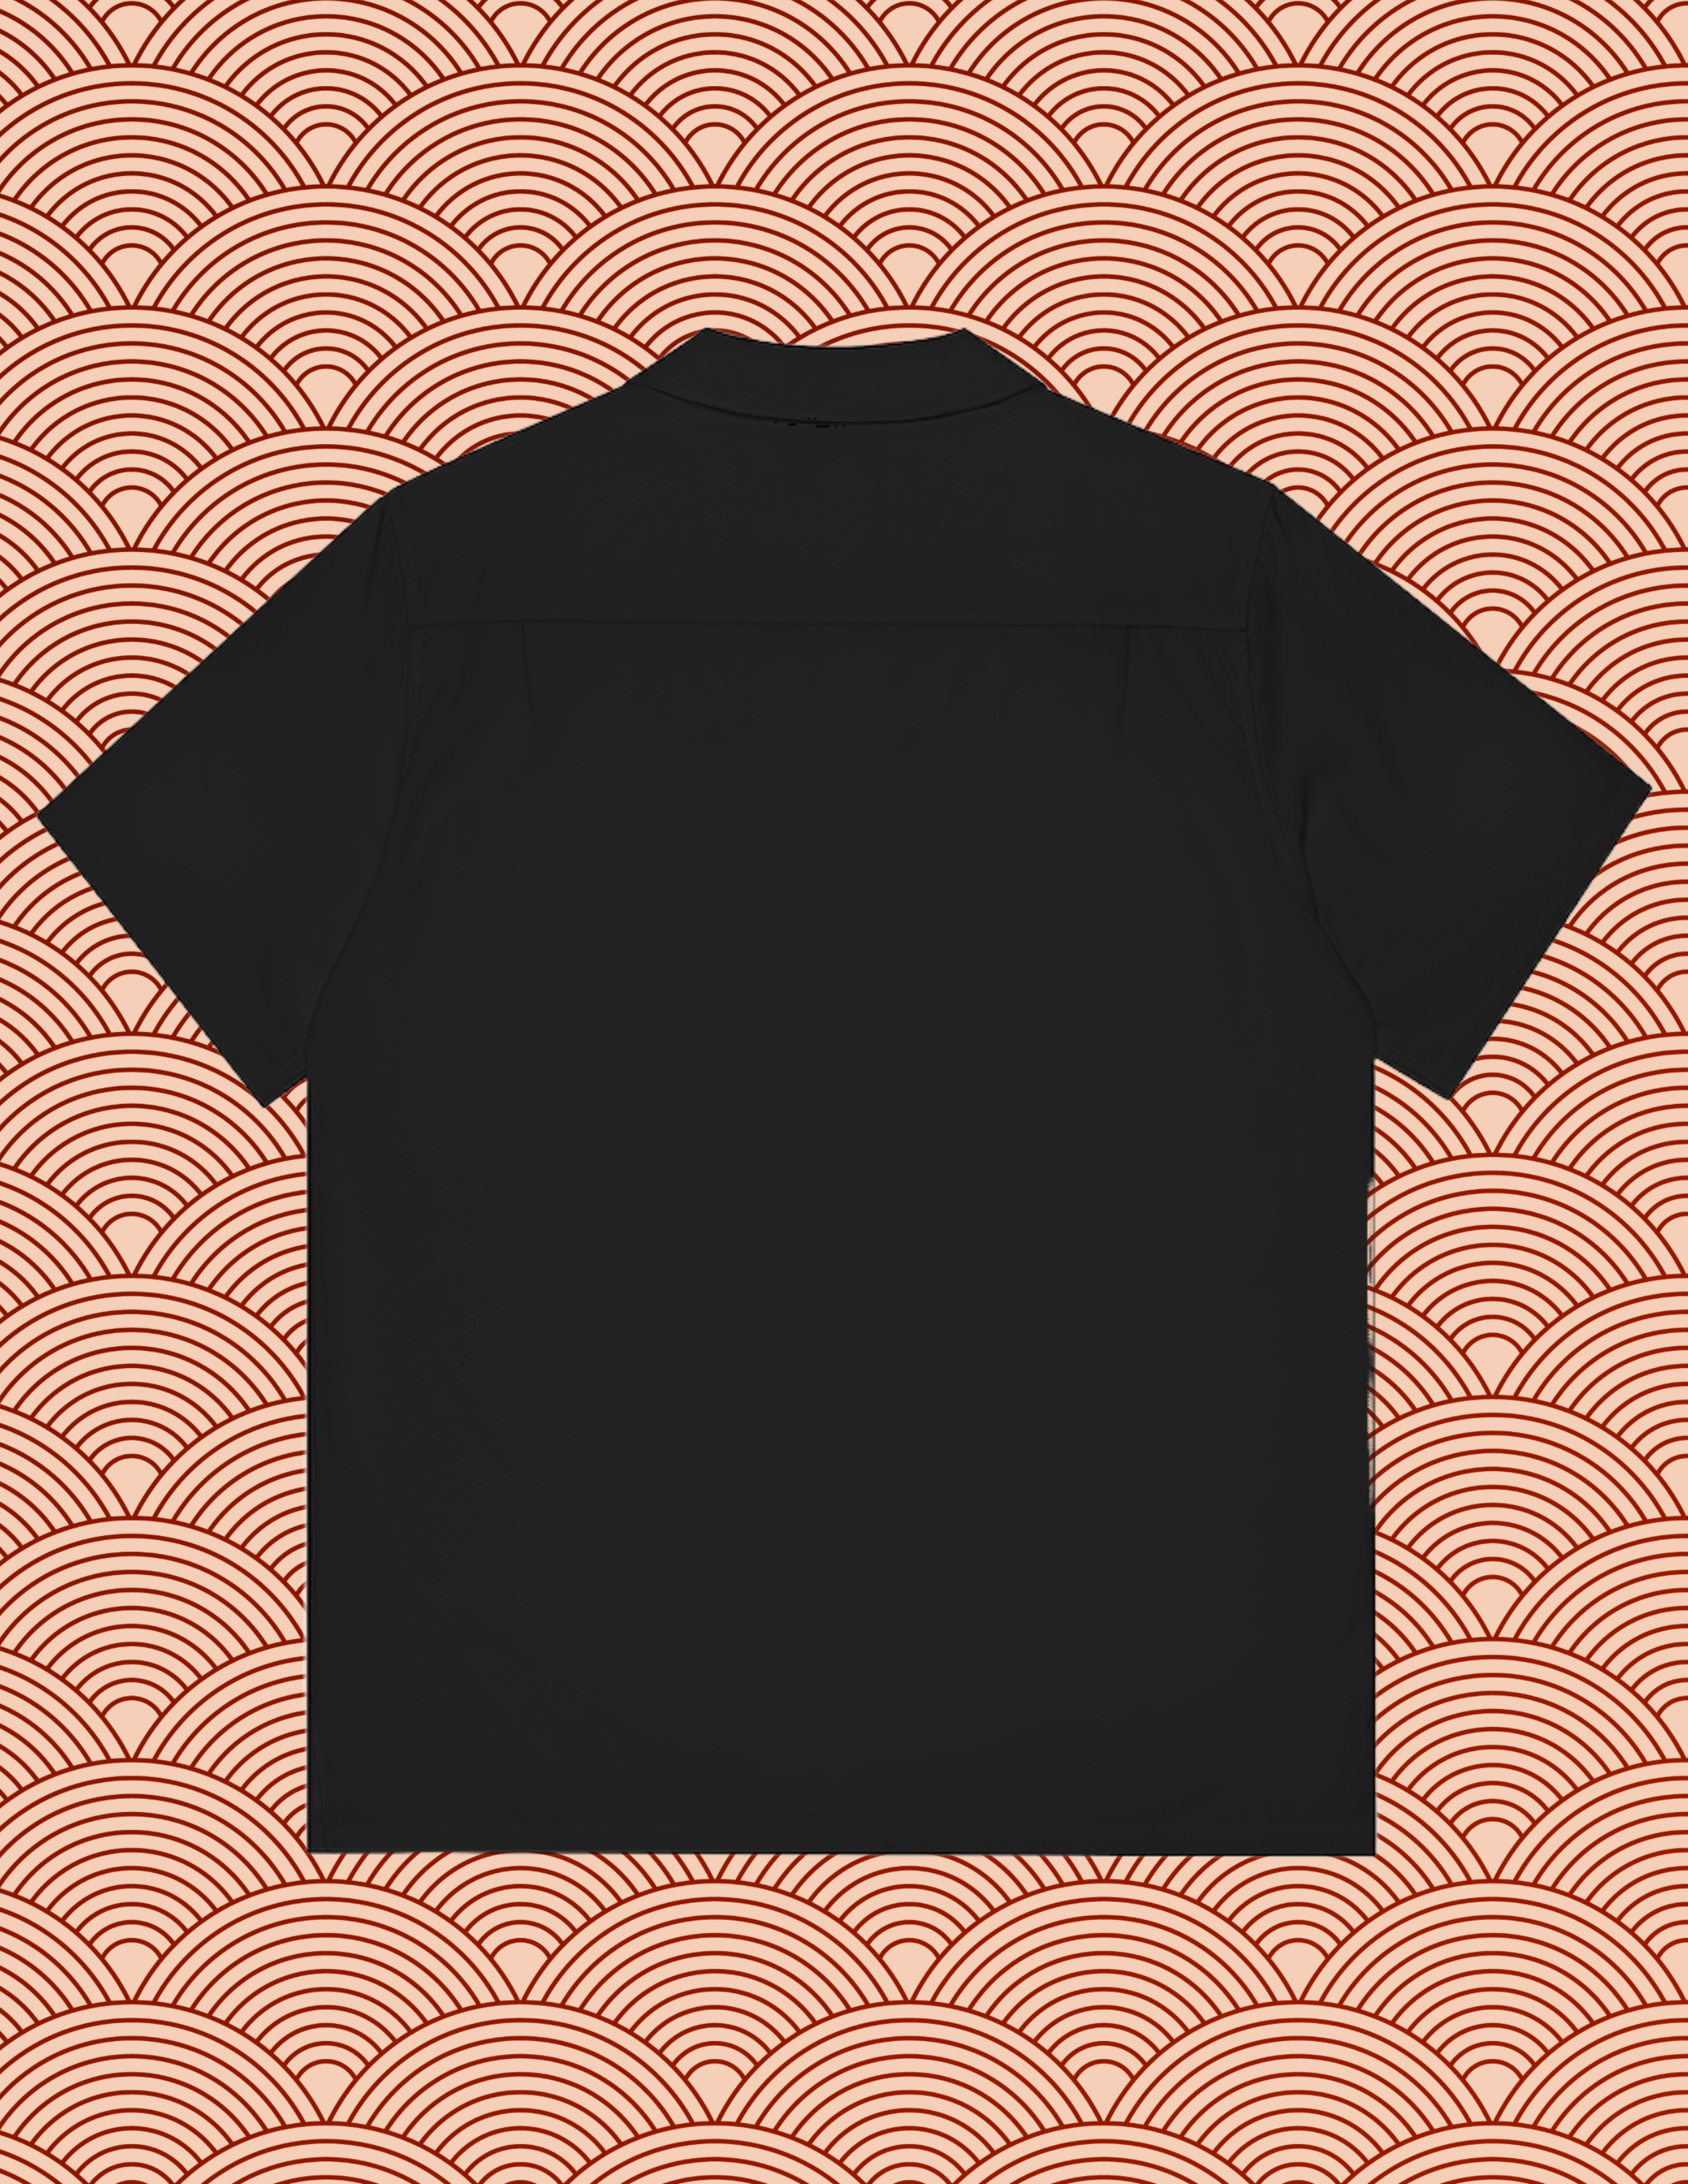 A black Oron's Collection LTE - Dangerous Snake T-Shirt on a red and orange background.